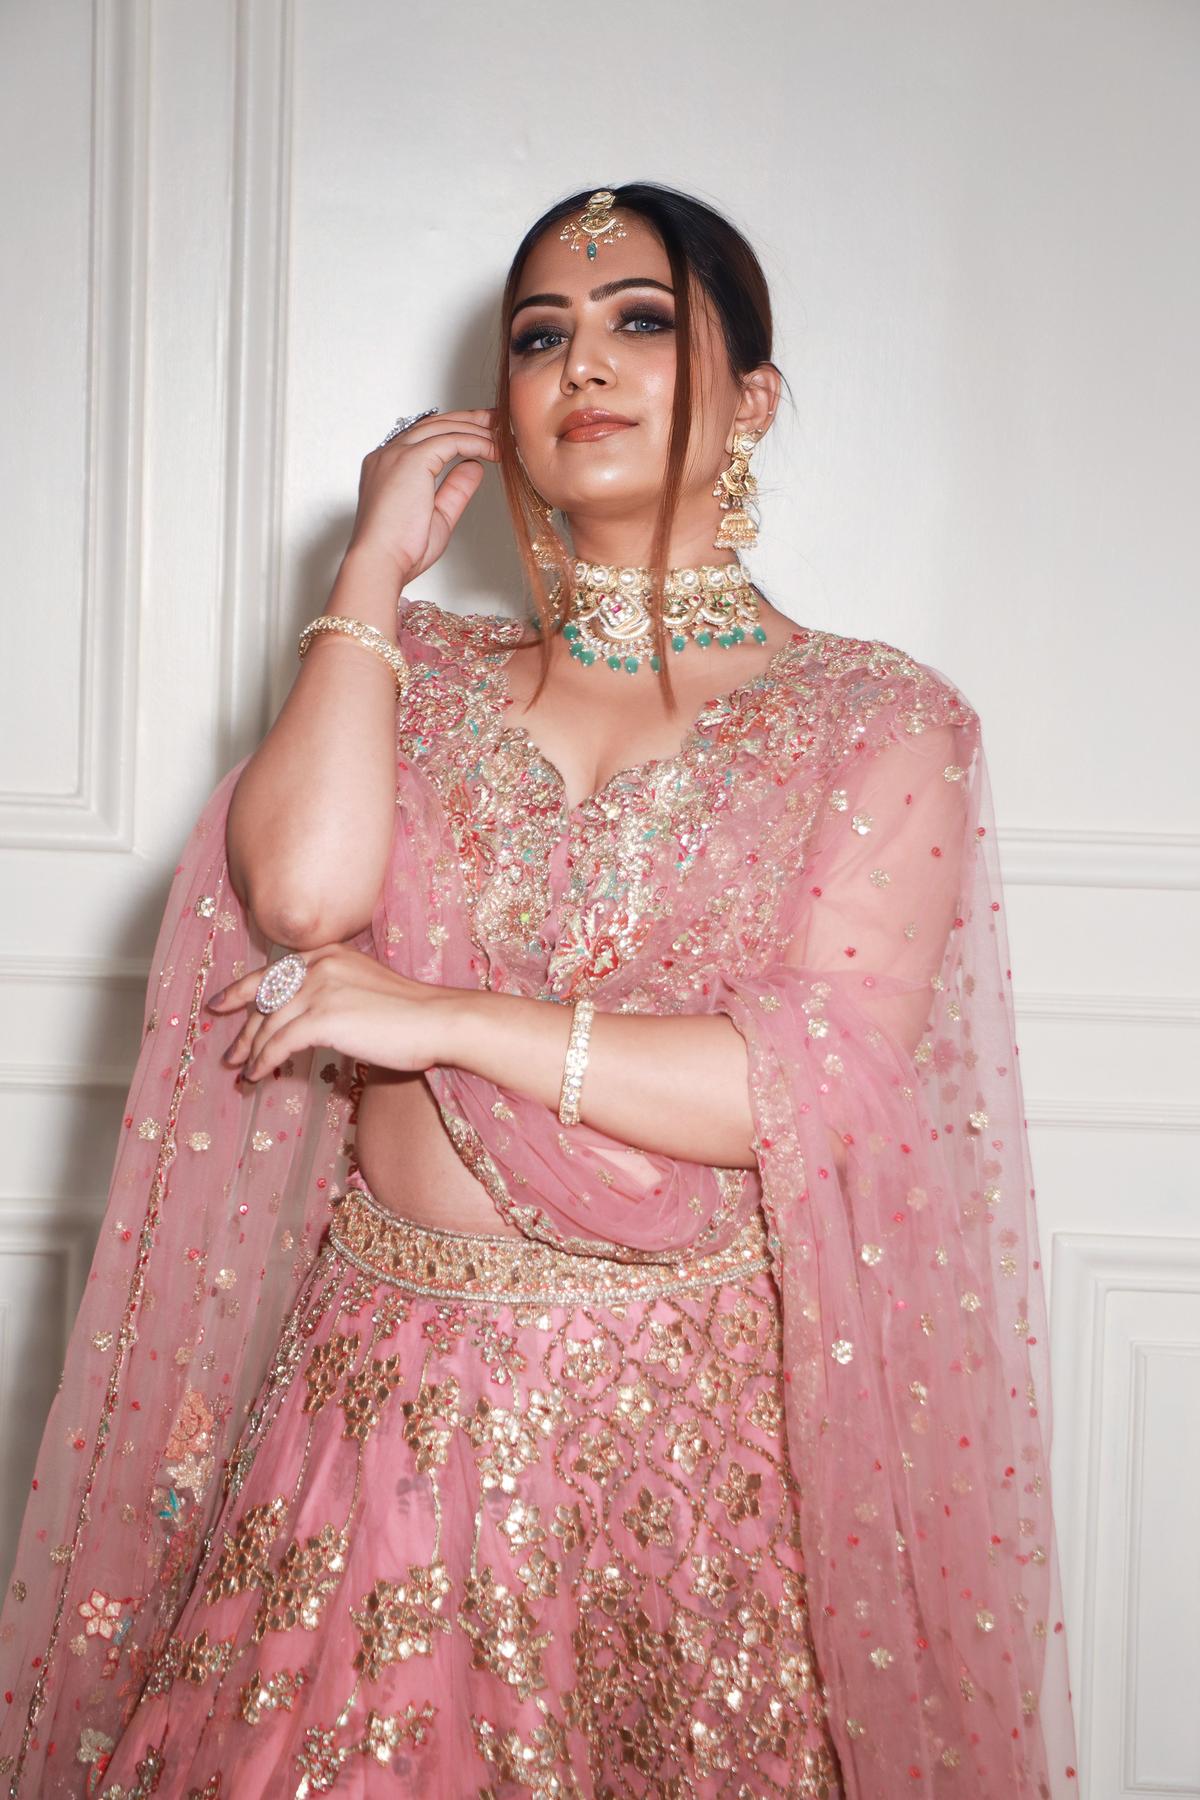 Mirari by Rimple & Harpreet | In Stores Now On Roshni, a rani pink tulle  lehenga. The vivid skirt is an interpretation of archival Pichh... |  Instagram